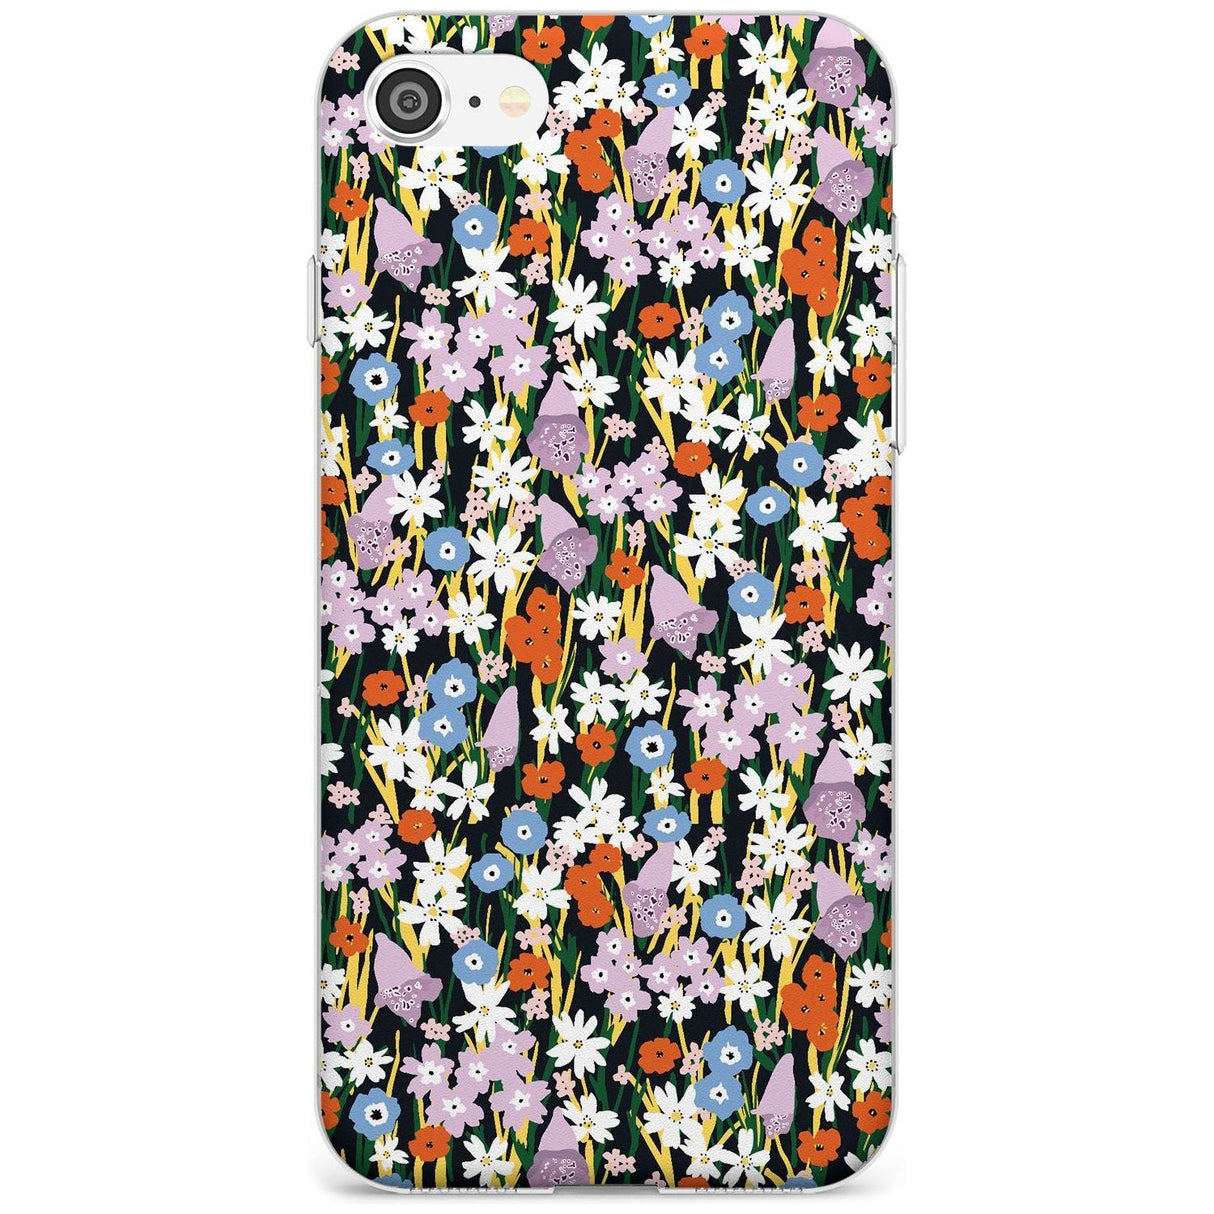 Energetic Floral Mix: Solid Black Impact Phone Case for iPhone SE 8 7 Plus